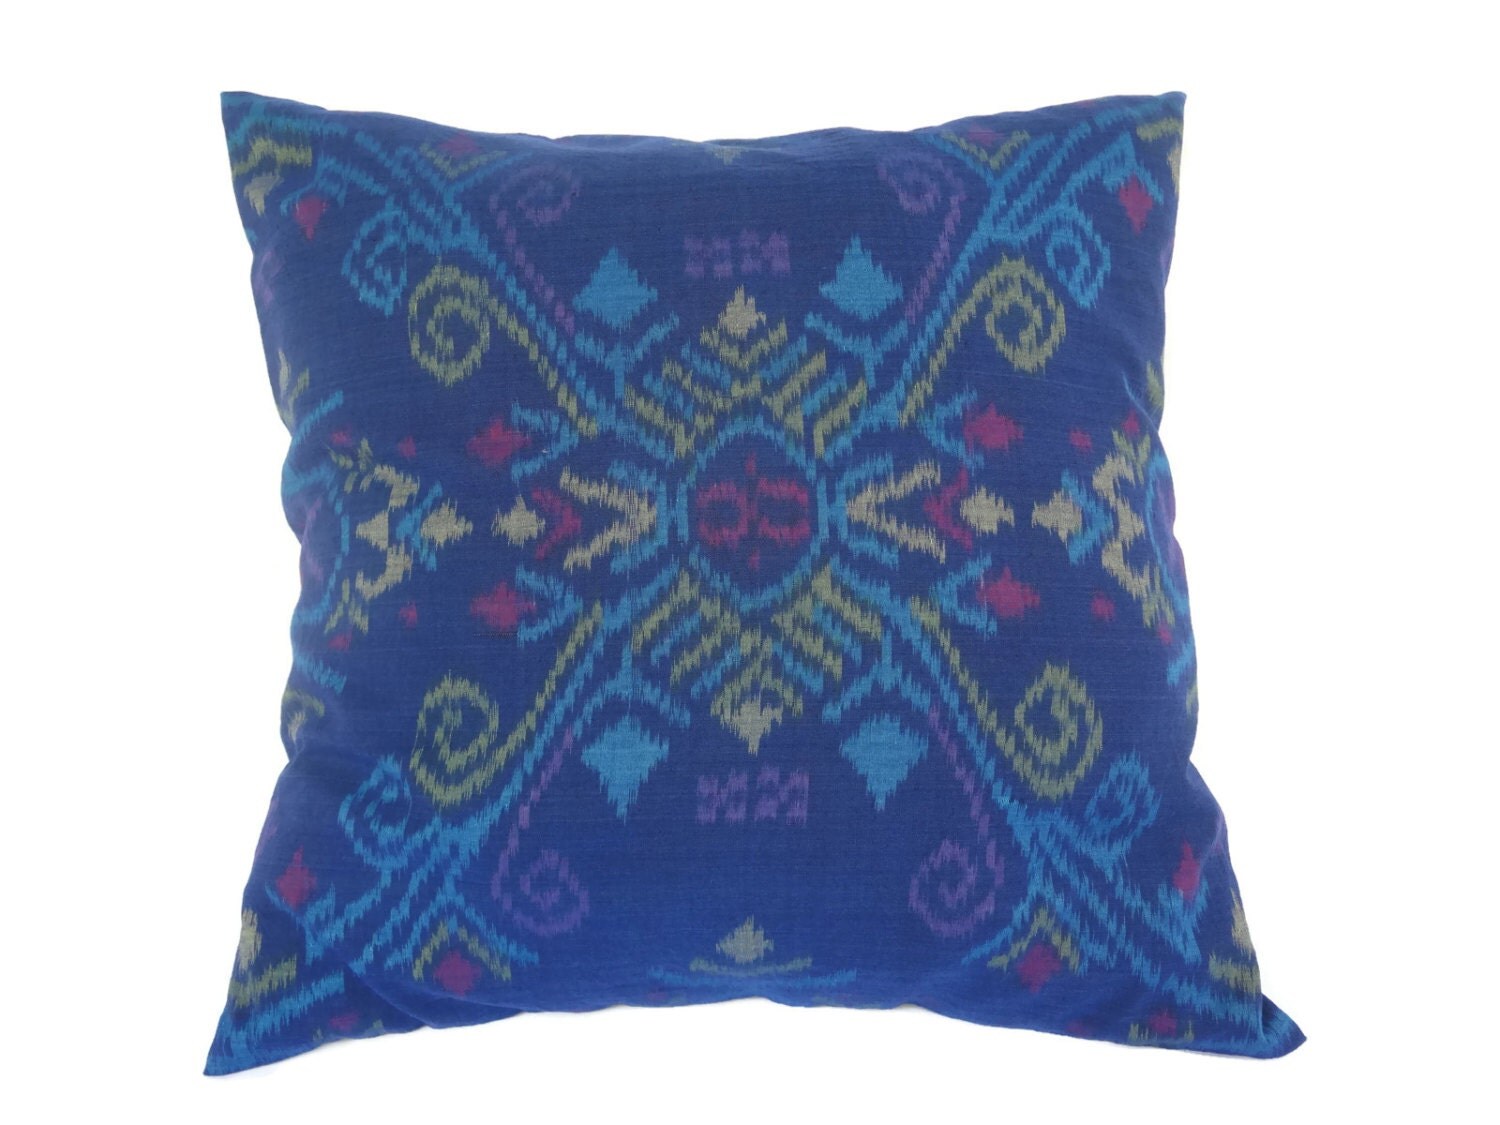 Indonesian Ikat Pillow  Cushion Hand Woven Hand Dyed 16 x